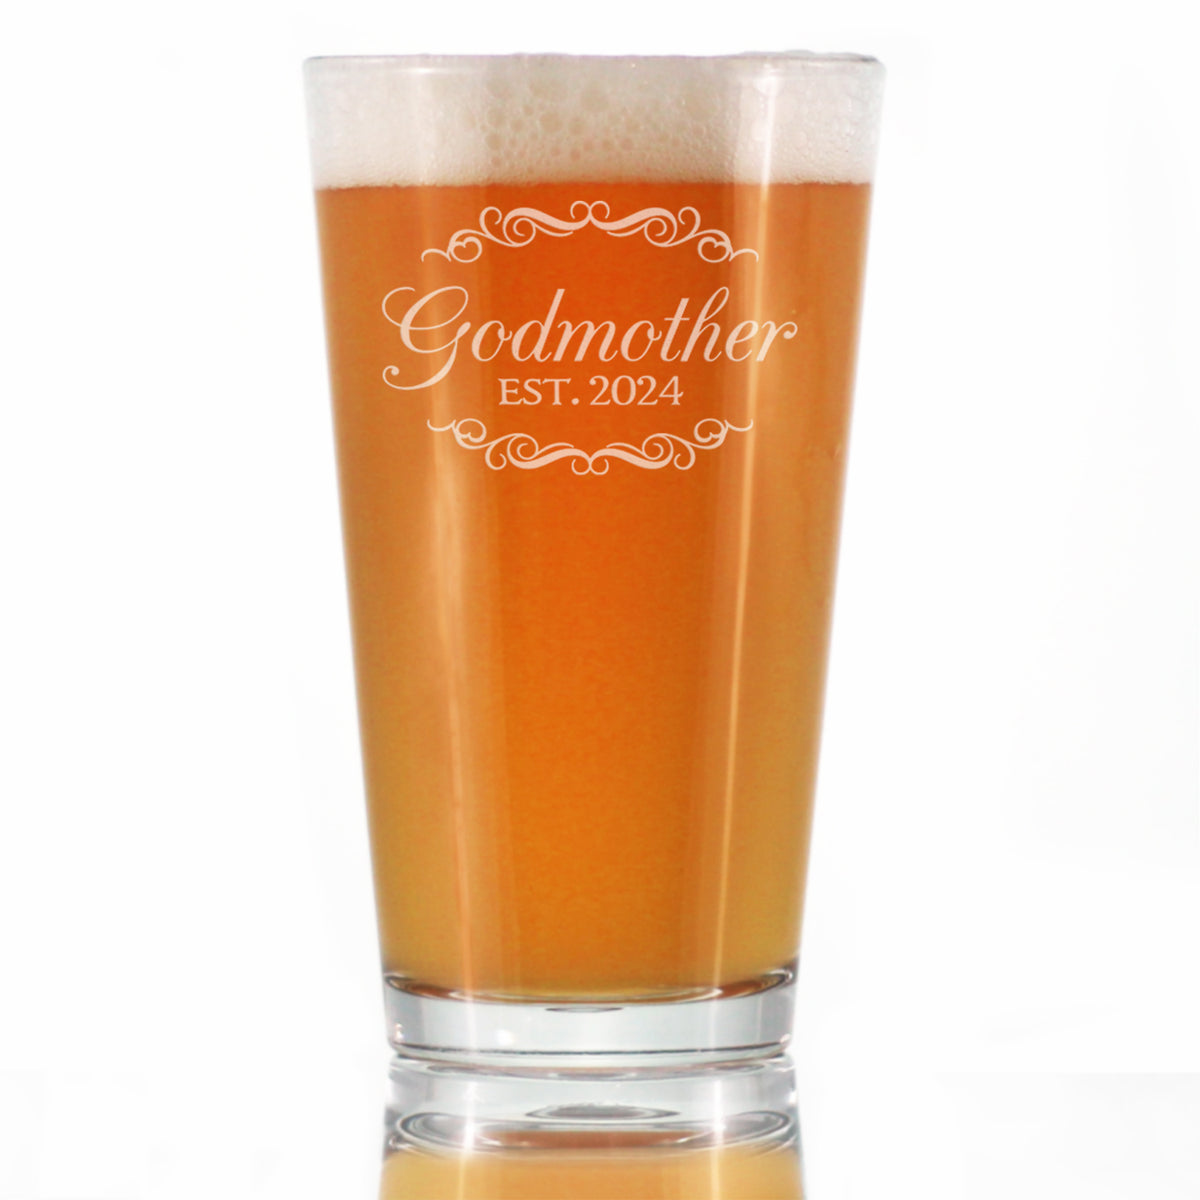 Godmother Est 2024 - New Godmother Pint Glass Proposal Gift for First Time Godparents - Decorative 16 Oz Glasses